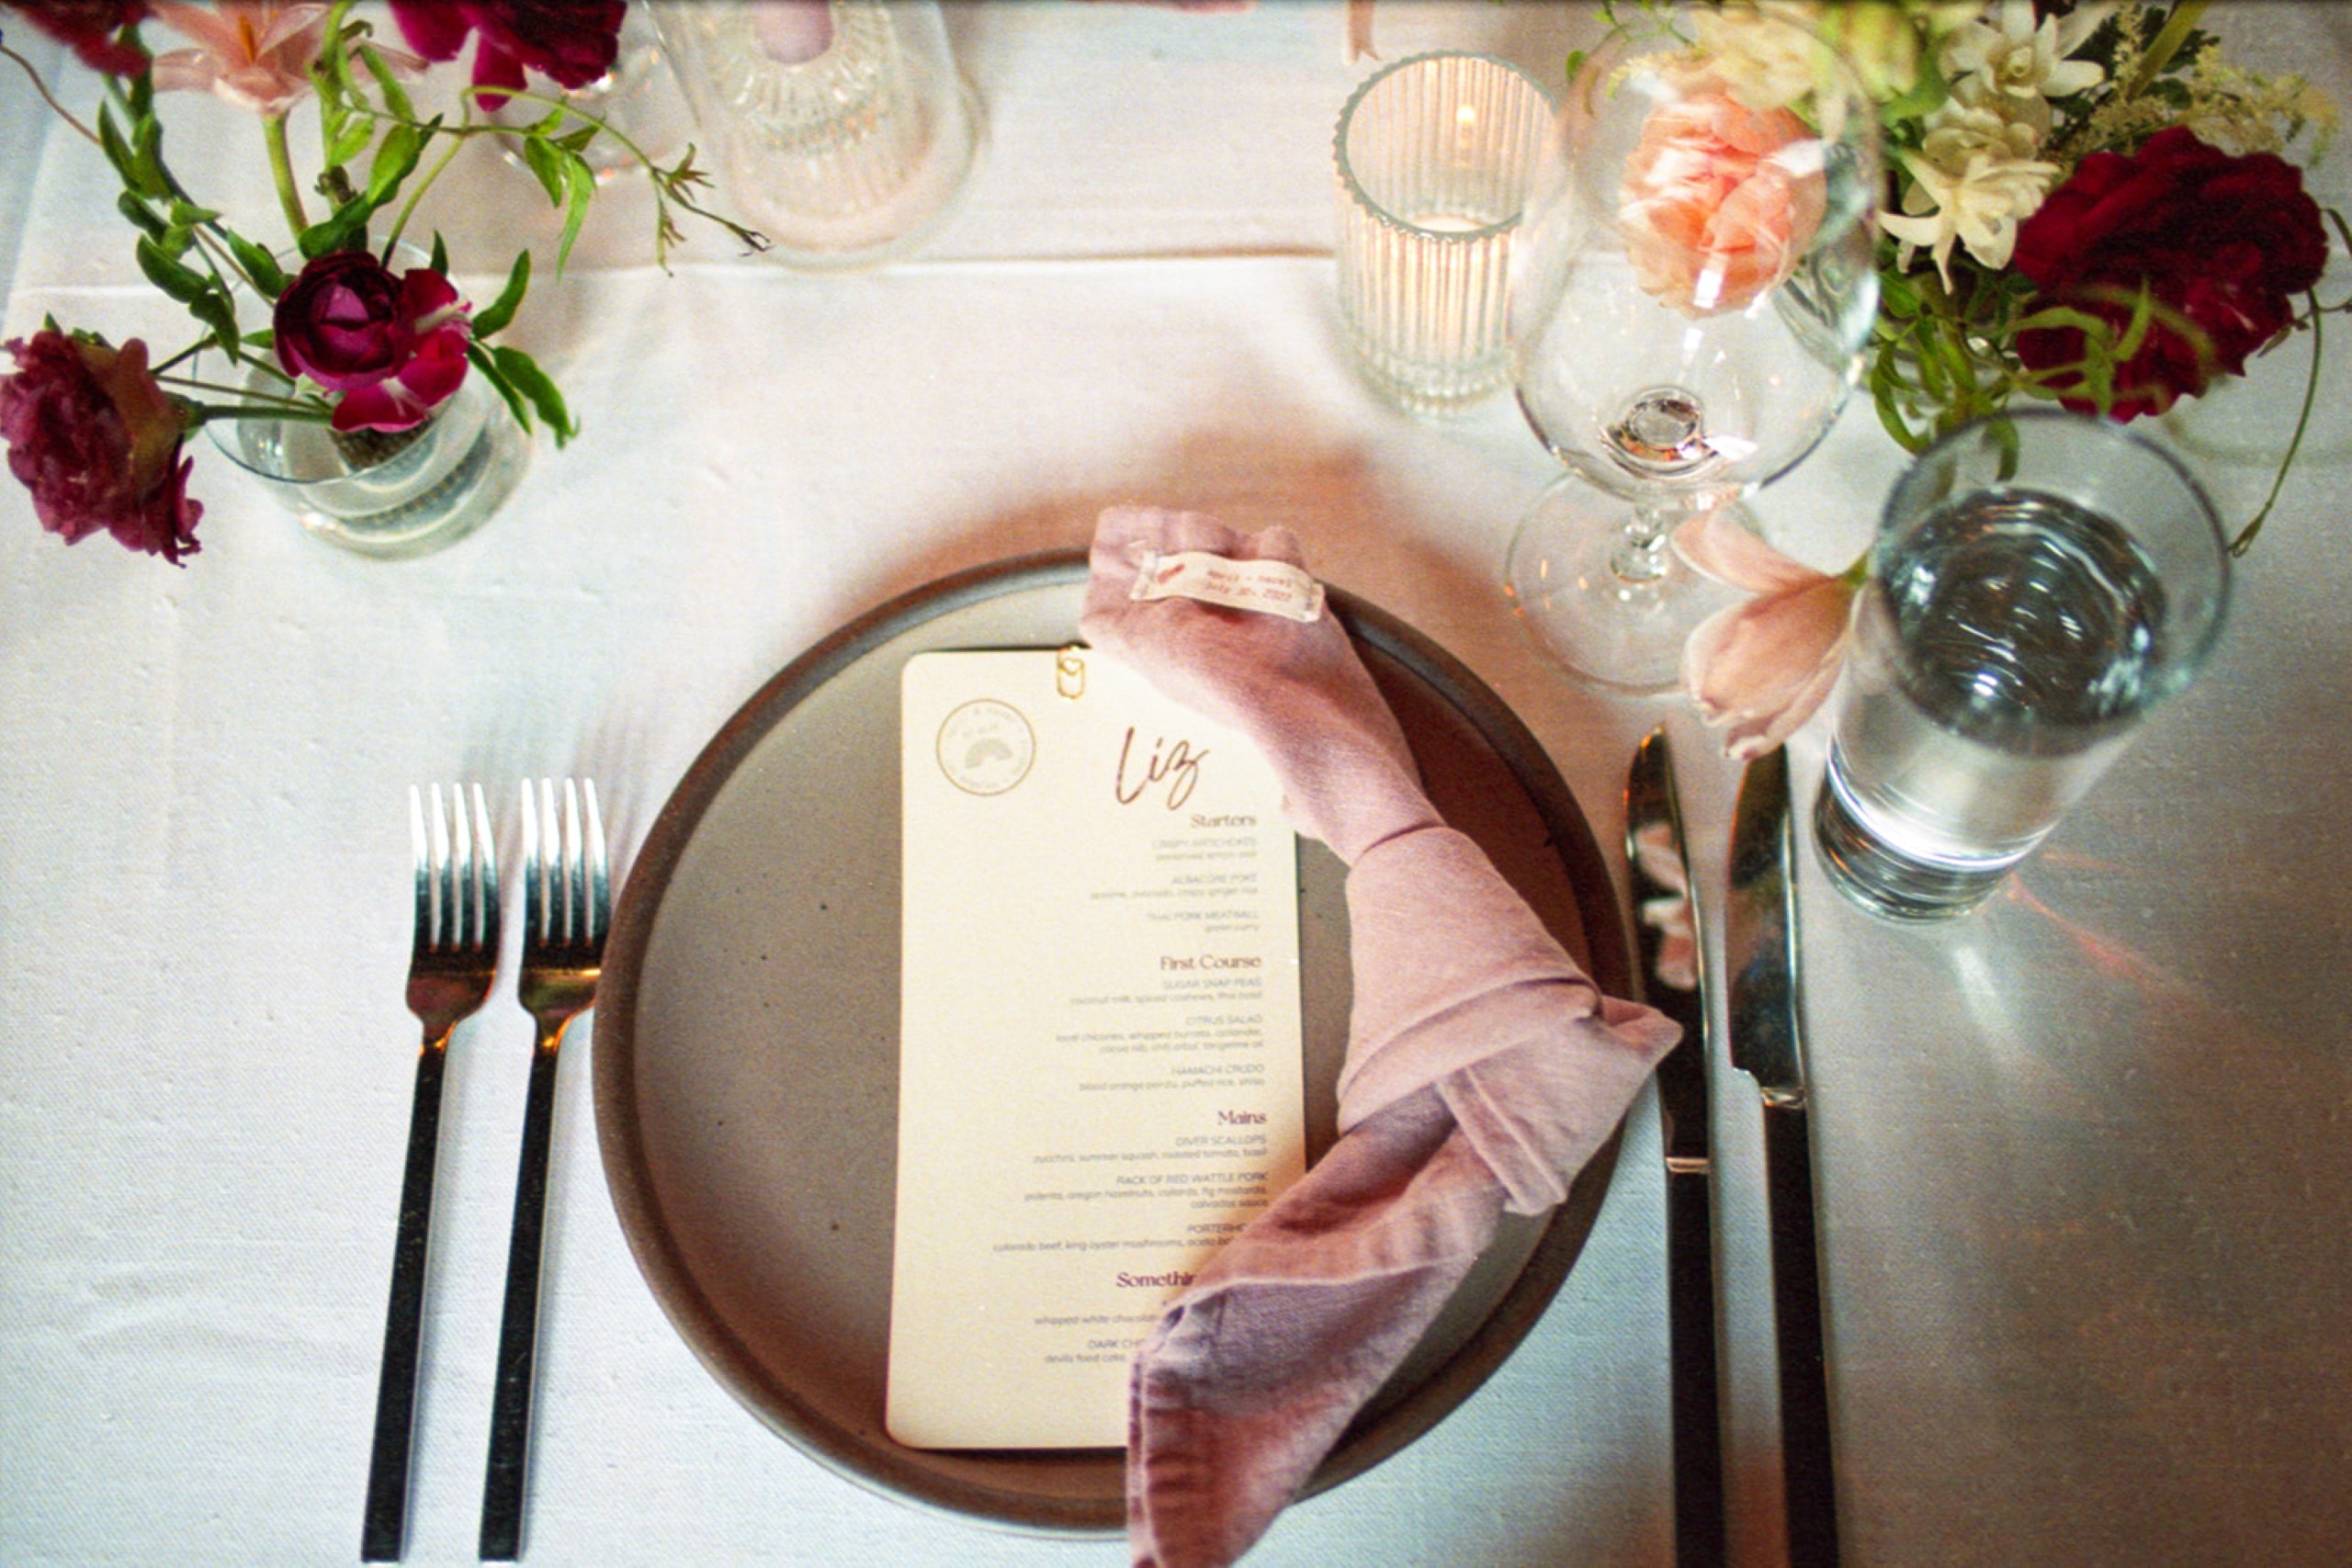 place setting with the name liz and pink napkin